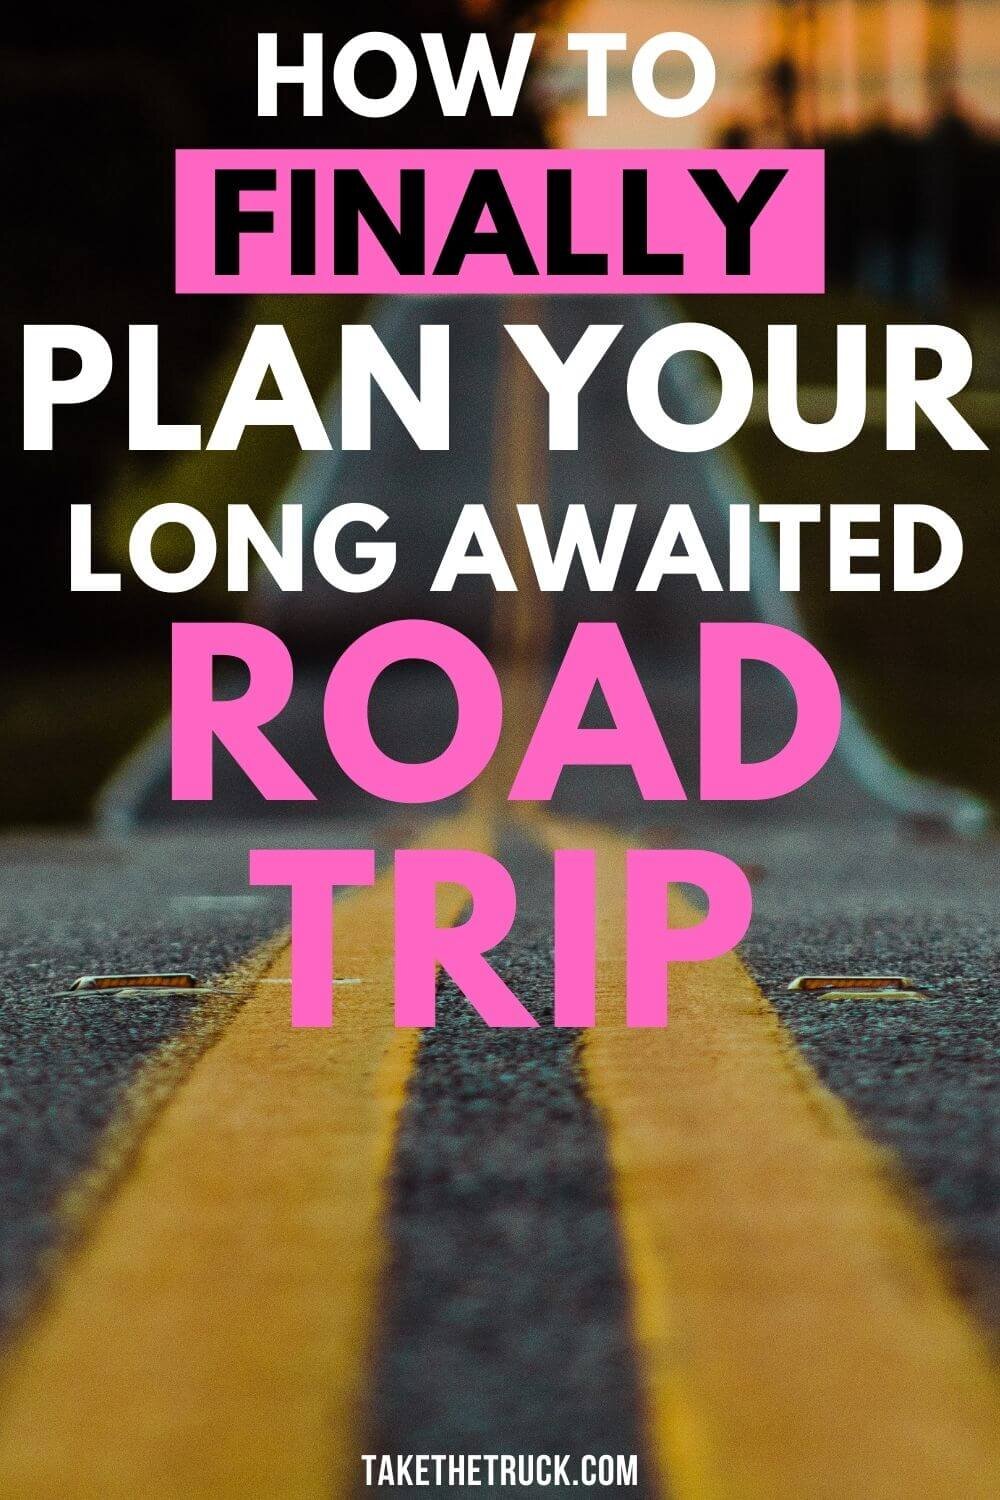 This post will help you figure out how to plan a road trip on a budget. From dreaming to realistic planning based on your family's budget, we’ll help you finally plan and take that road trip!